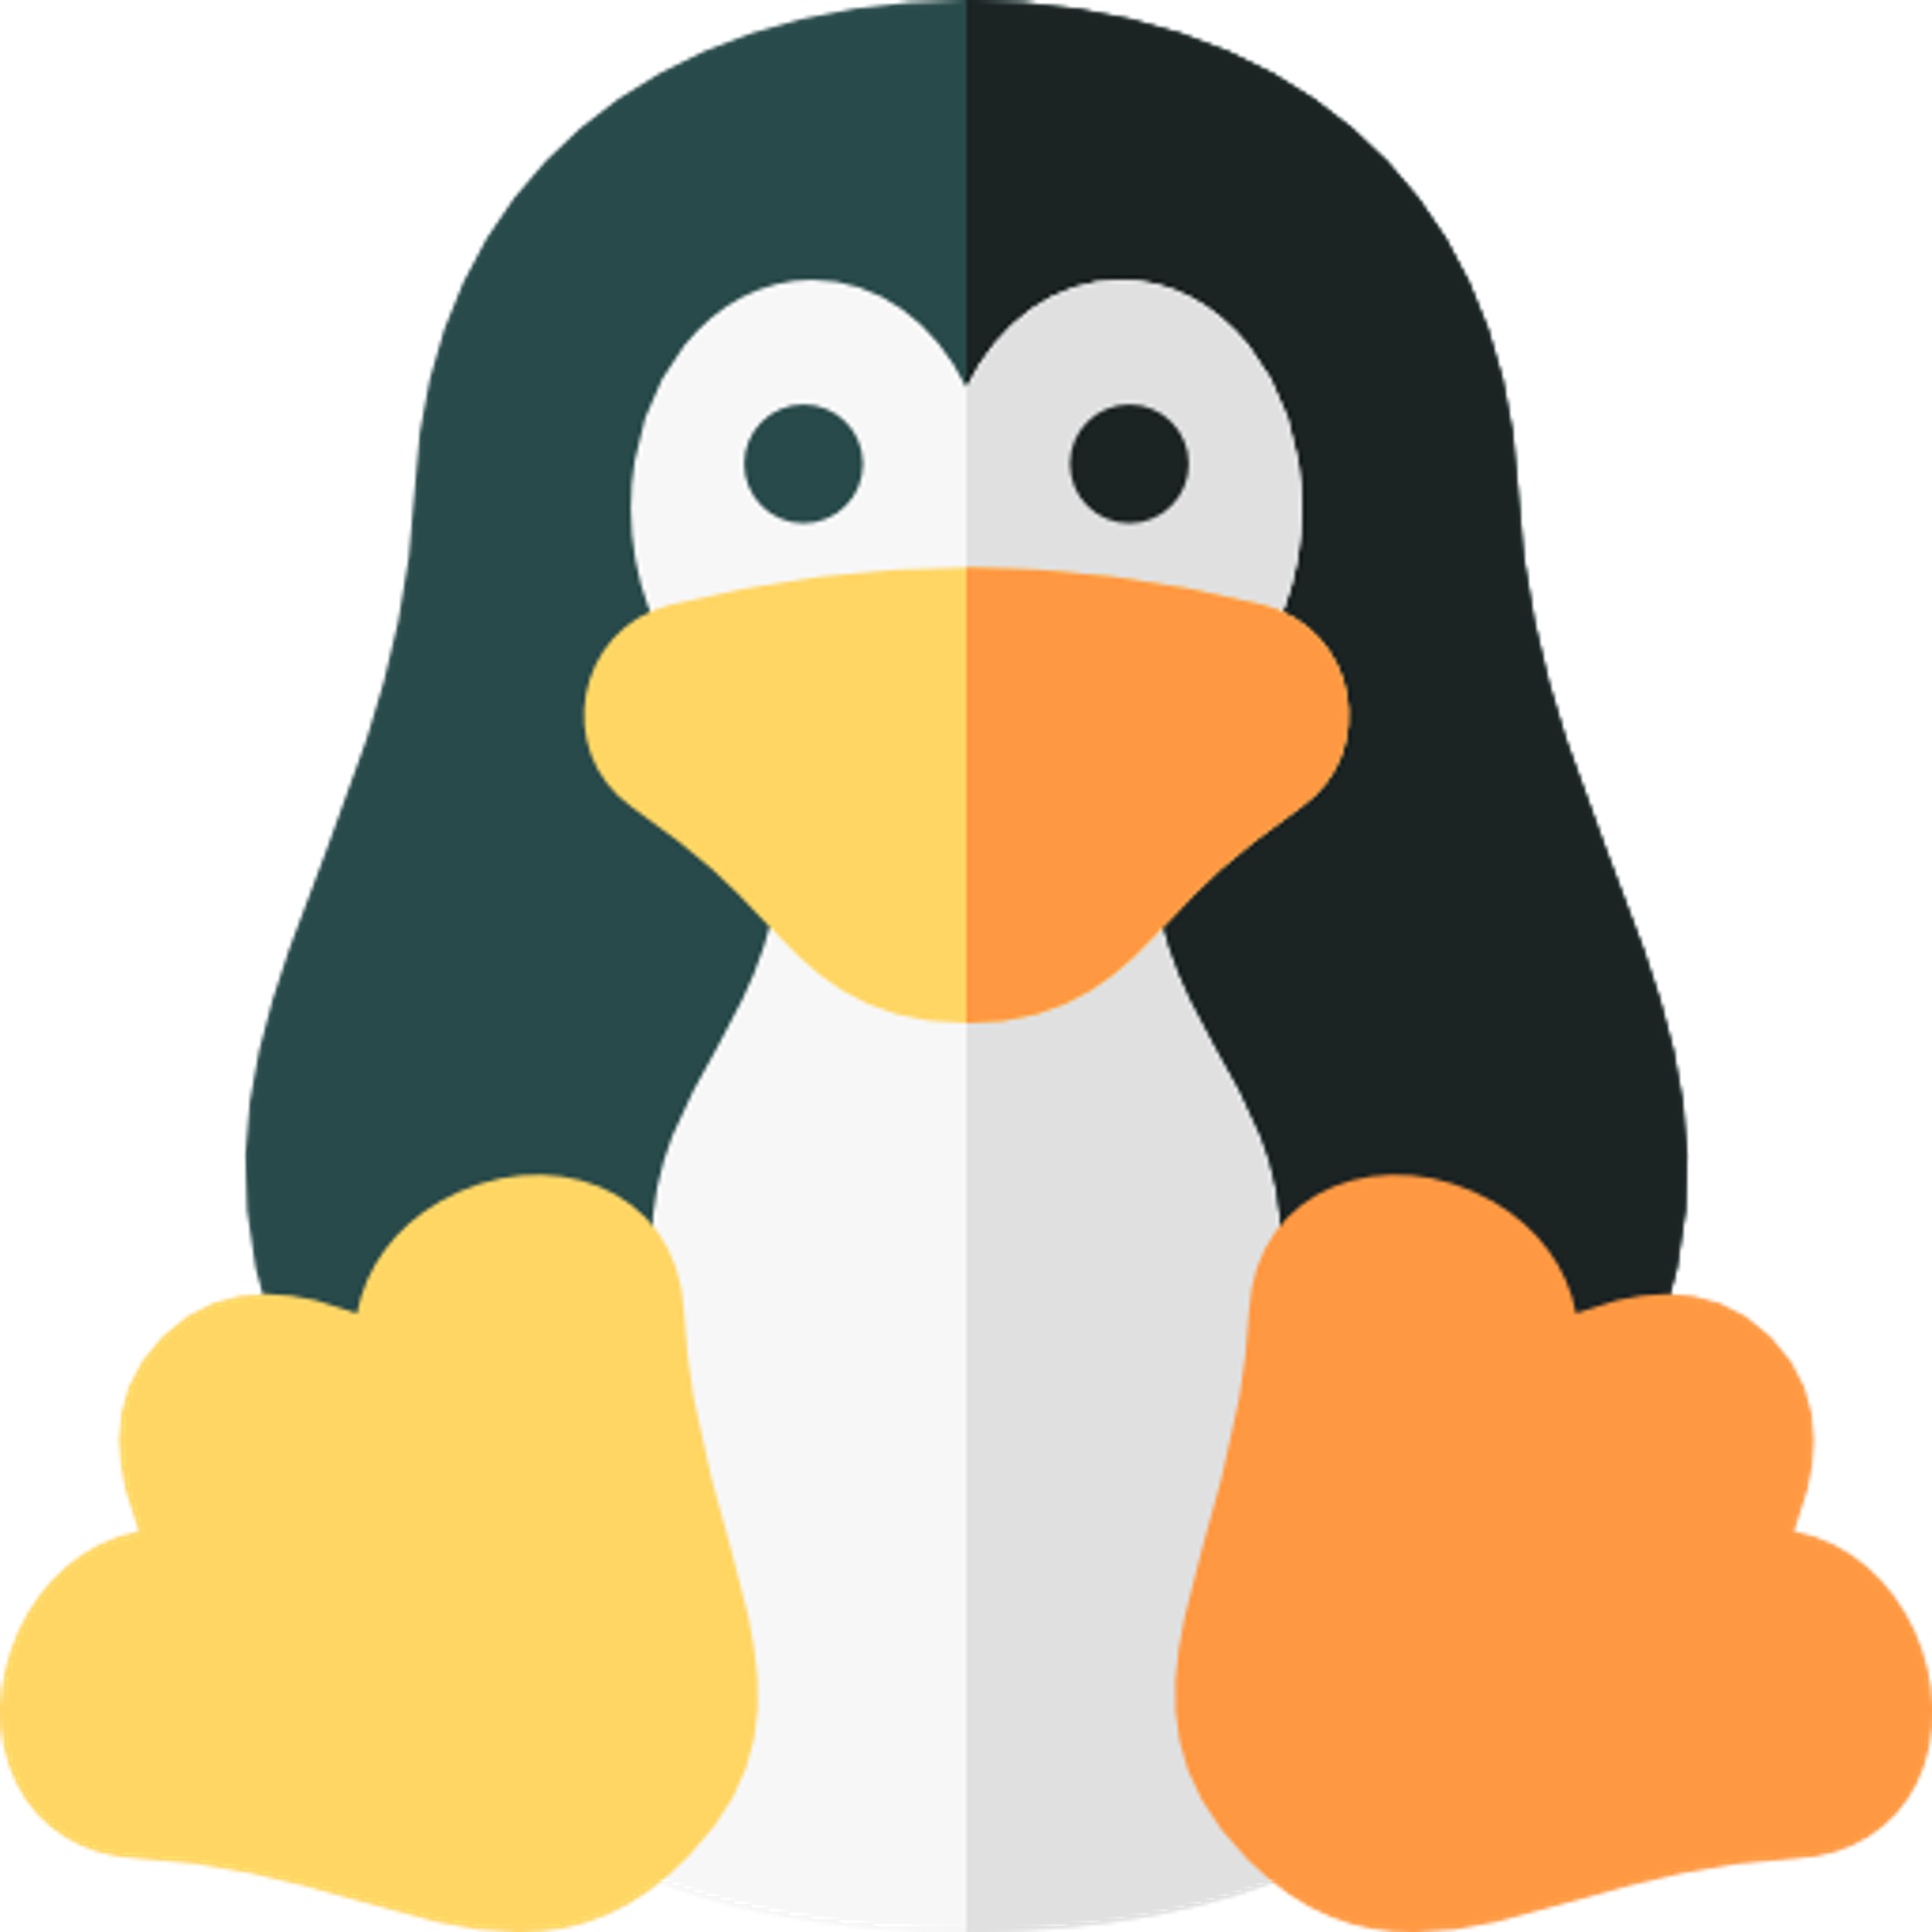 Commonly Used Linux Troubleshooting Commands